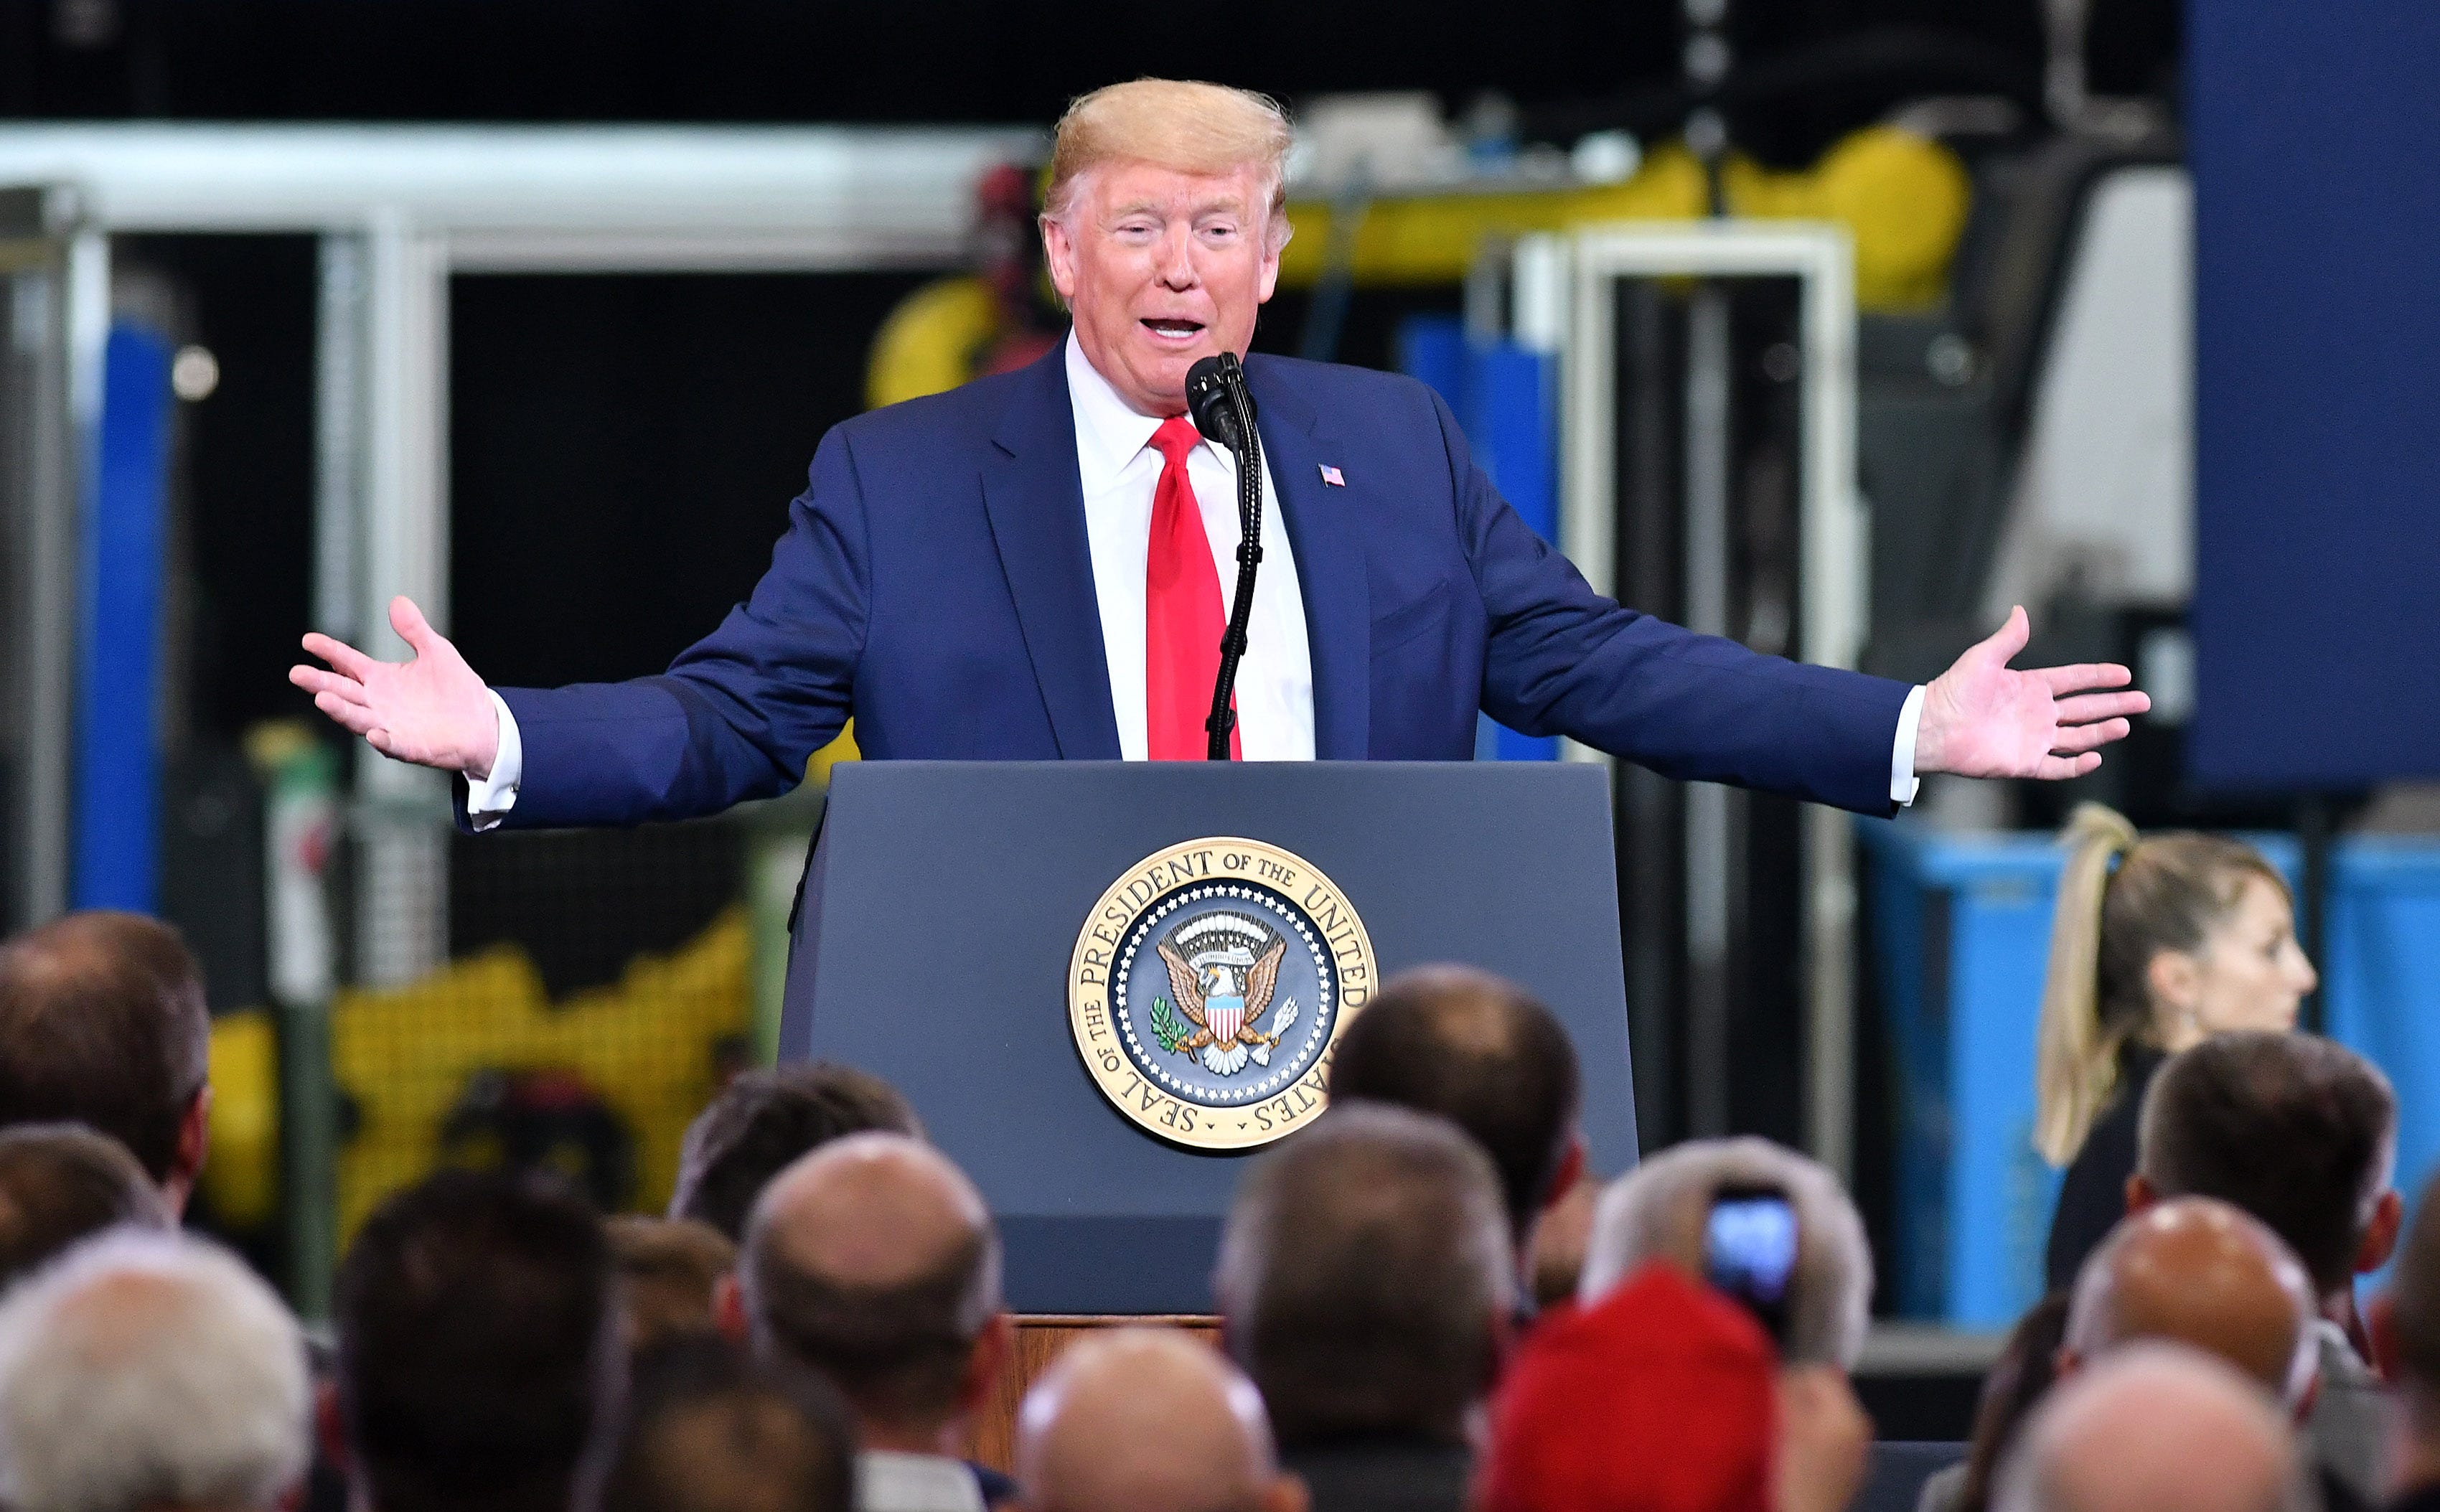 President Donald Trump gives remarks at Dana Incorporated in Warren, Mich. on Jan. 30, 2020.